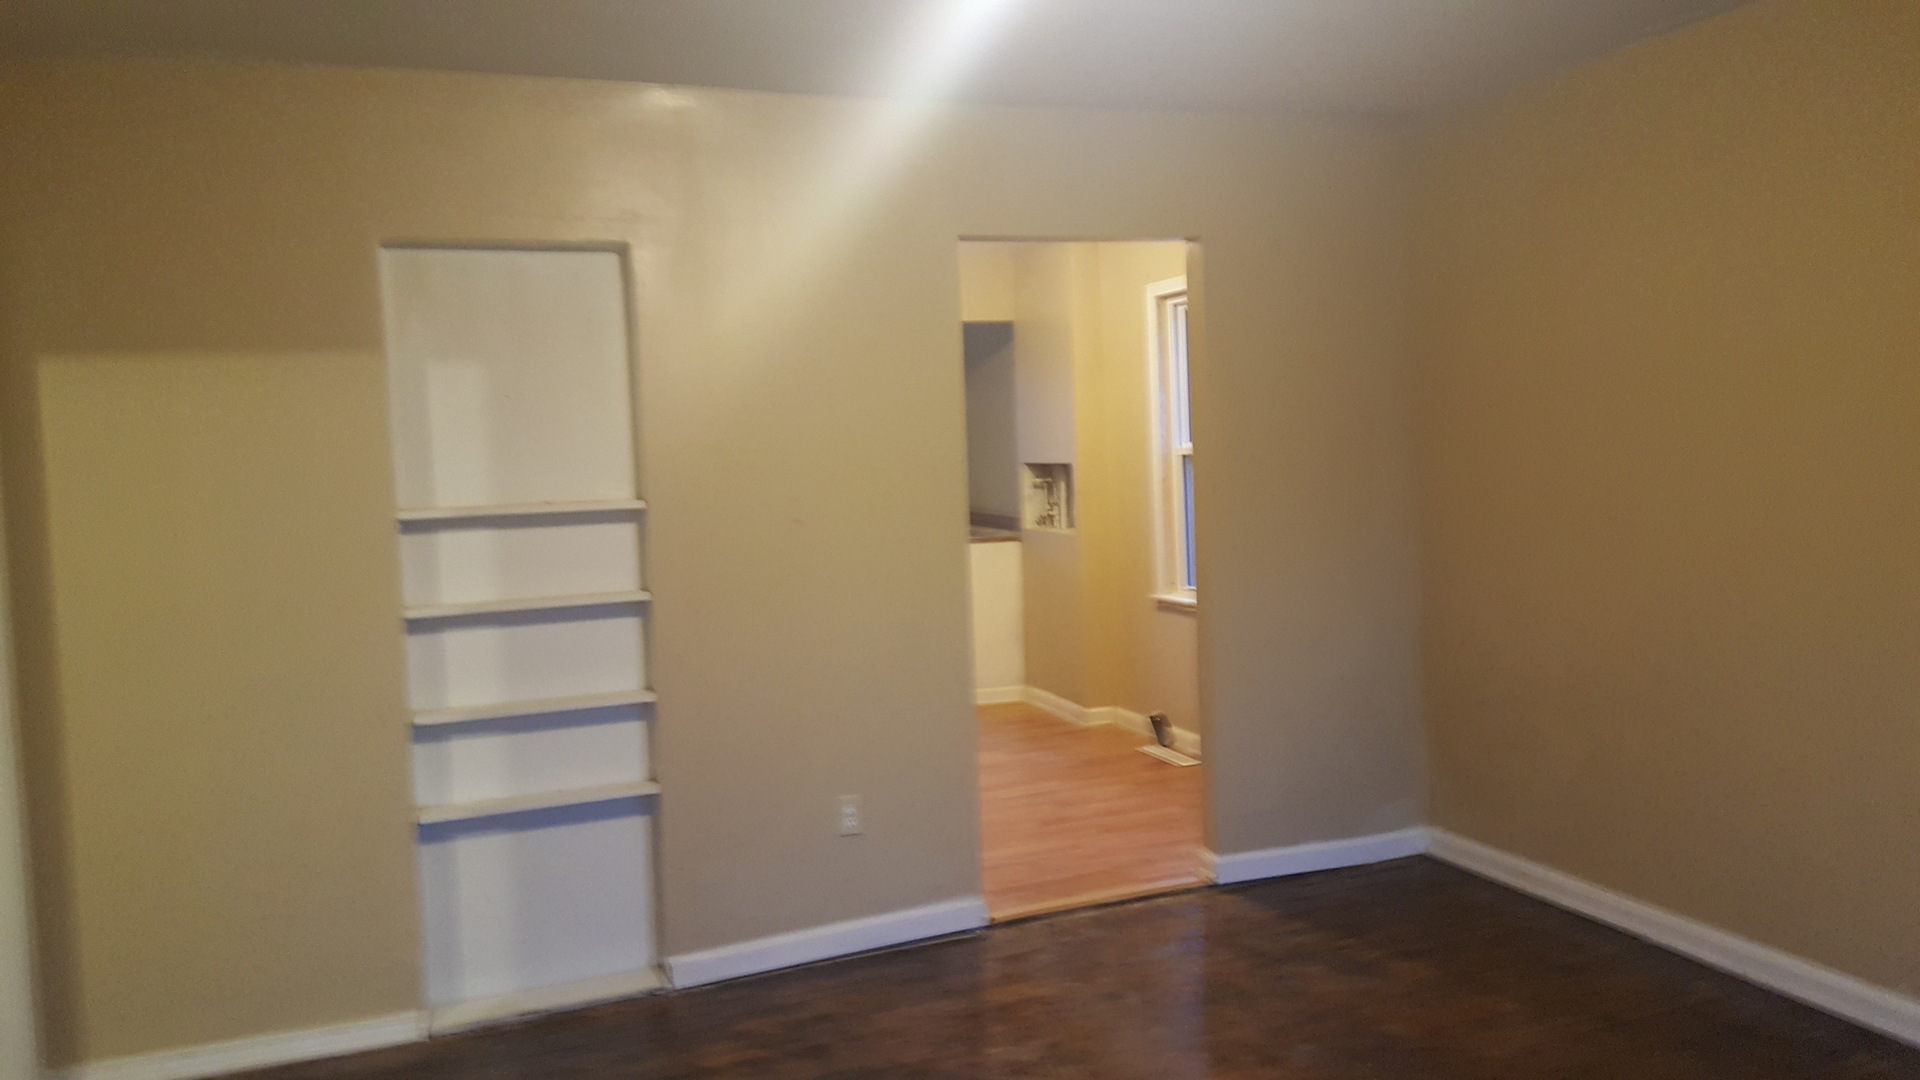 3 BED ROOM HOUSE IN SOUTH KC